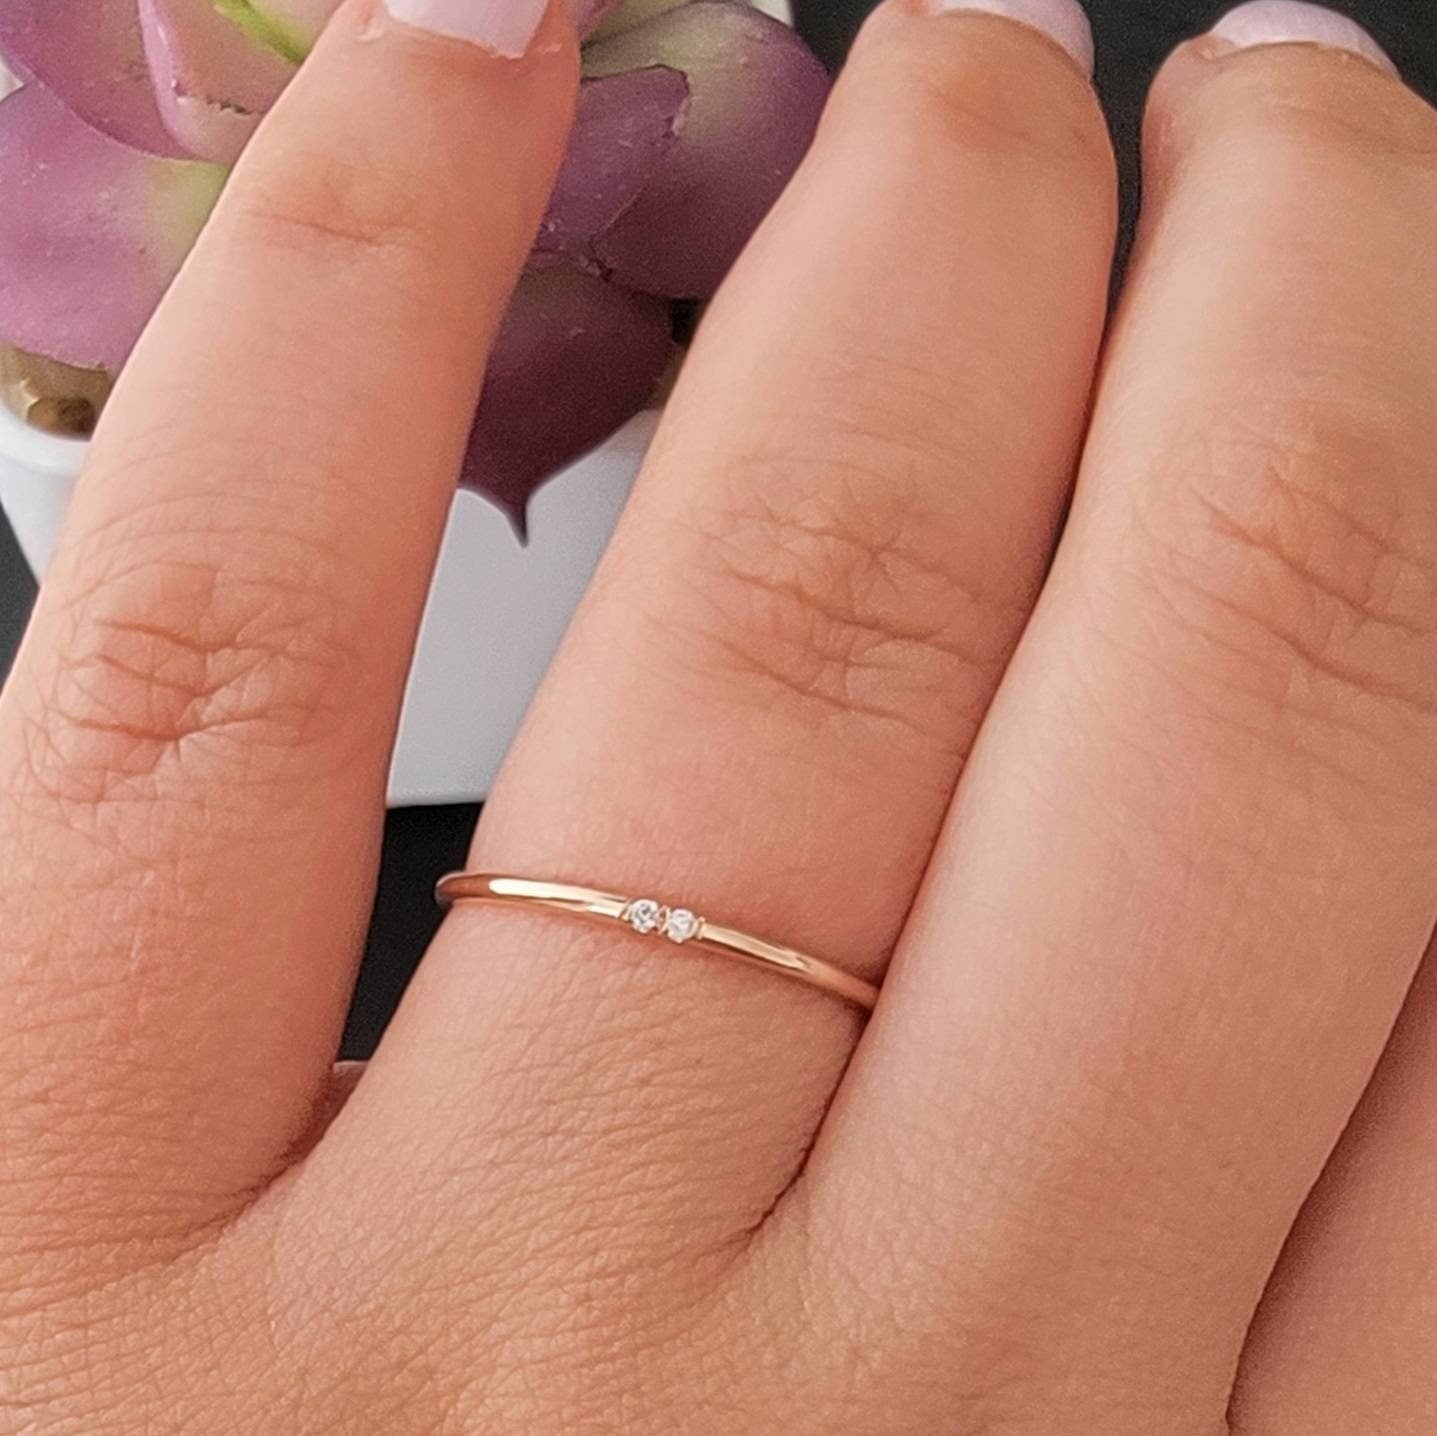 Dainty Ring, Gold Ring, Minimalist Ring, Delicate Ring, Tiny Ring, Stacking  Ring, Stackable Ring, Minimalist Jewelry, Engagement Ring - Etsy | Dainty engagement  rings, Delicate rings, Dainty gold rings